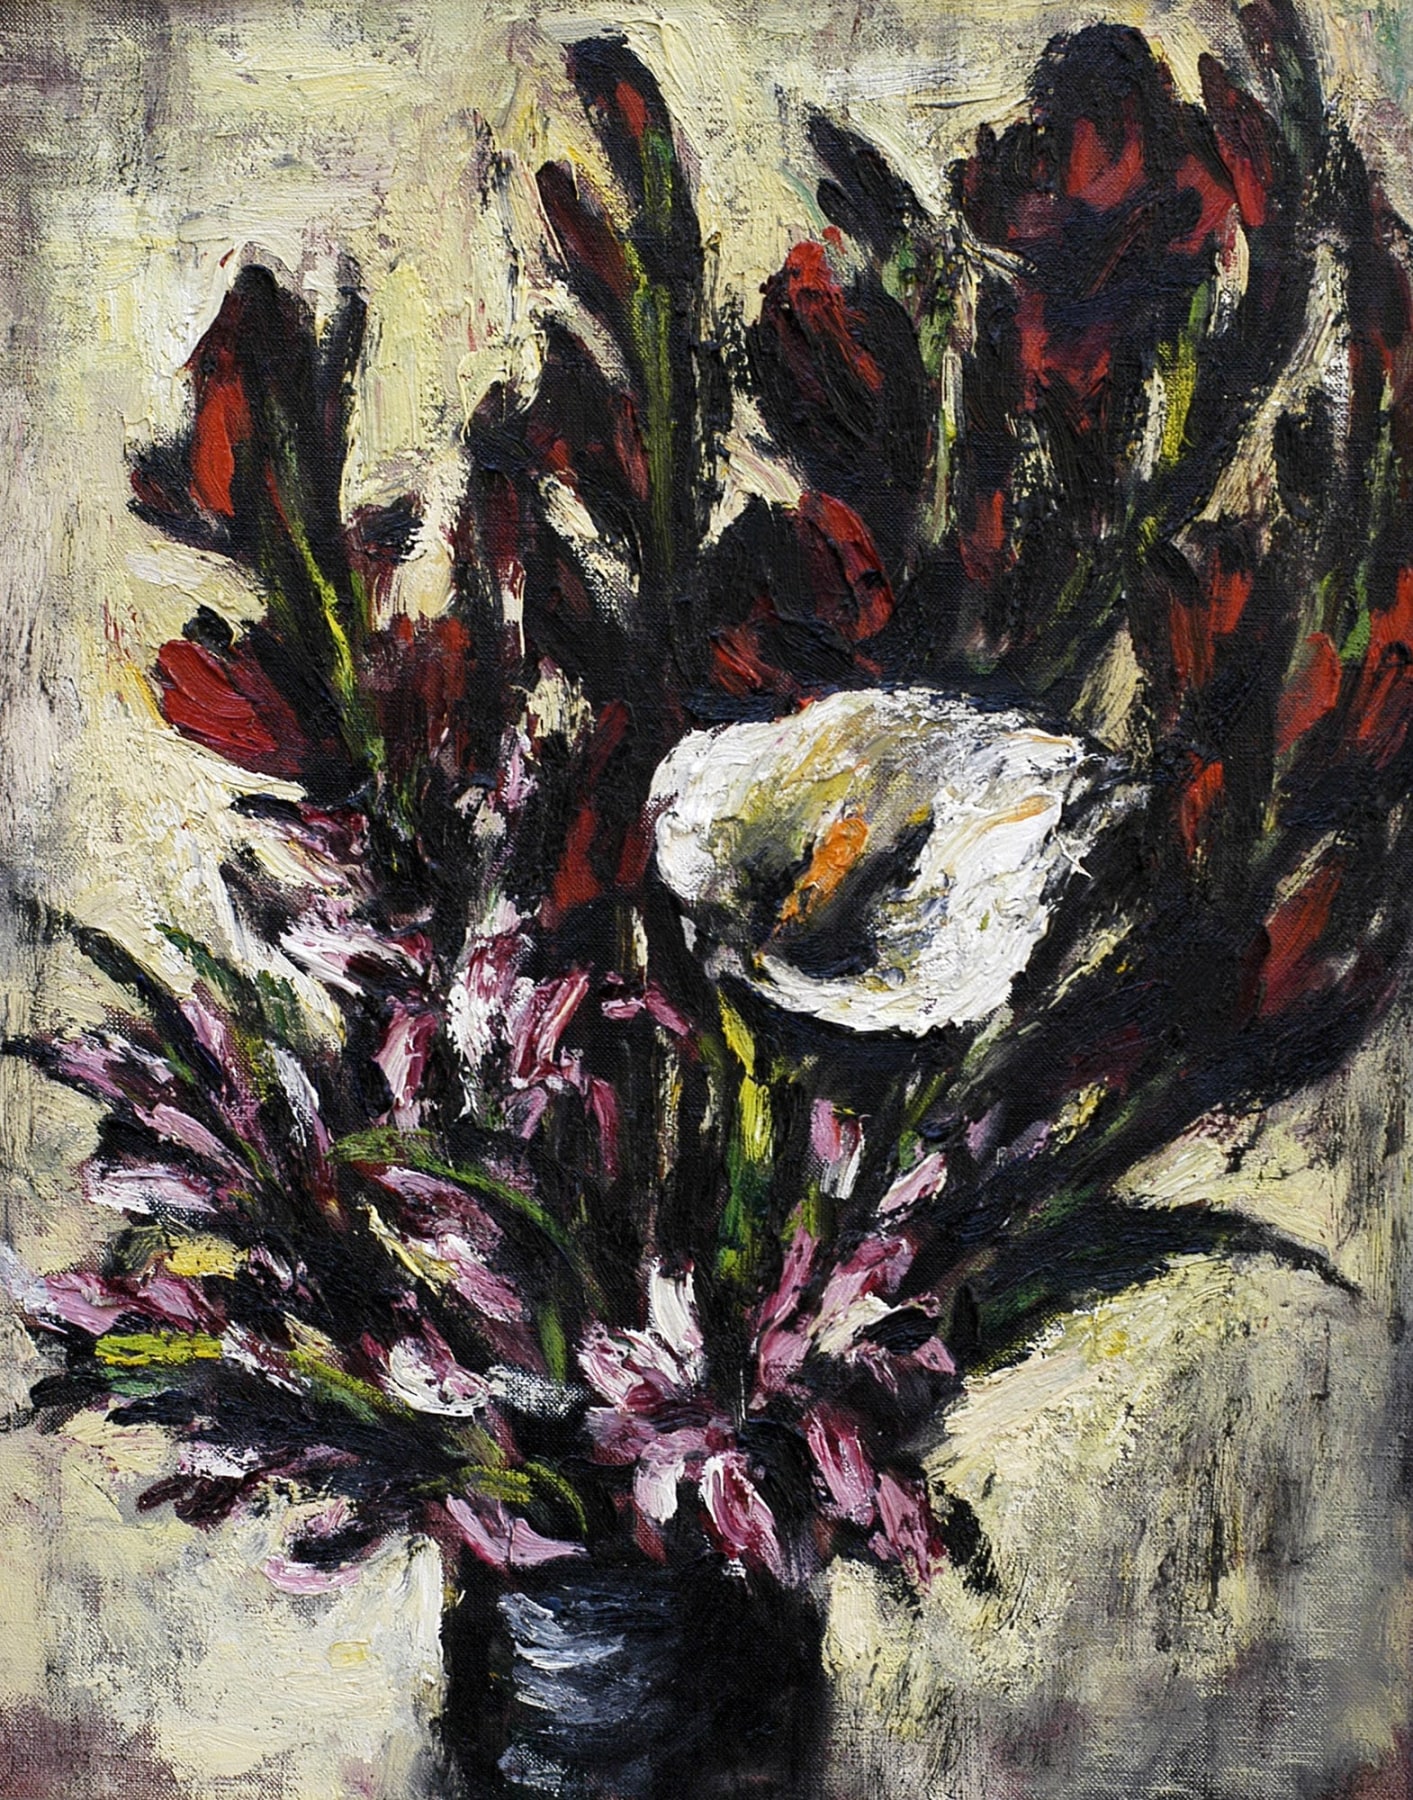 DAN LUTZ (1906-1978), Lily with Red Glads, 1954